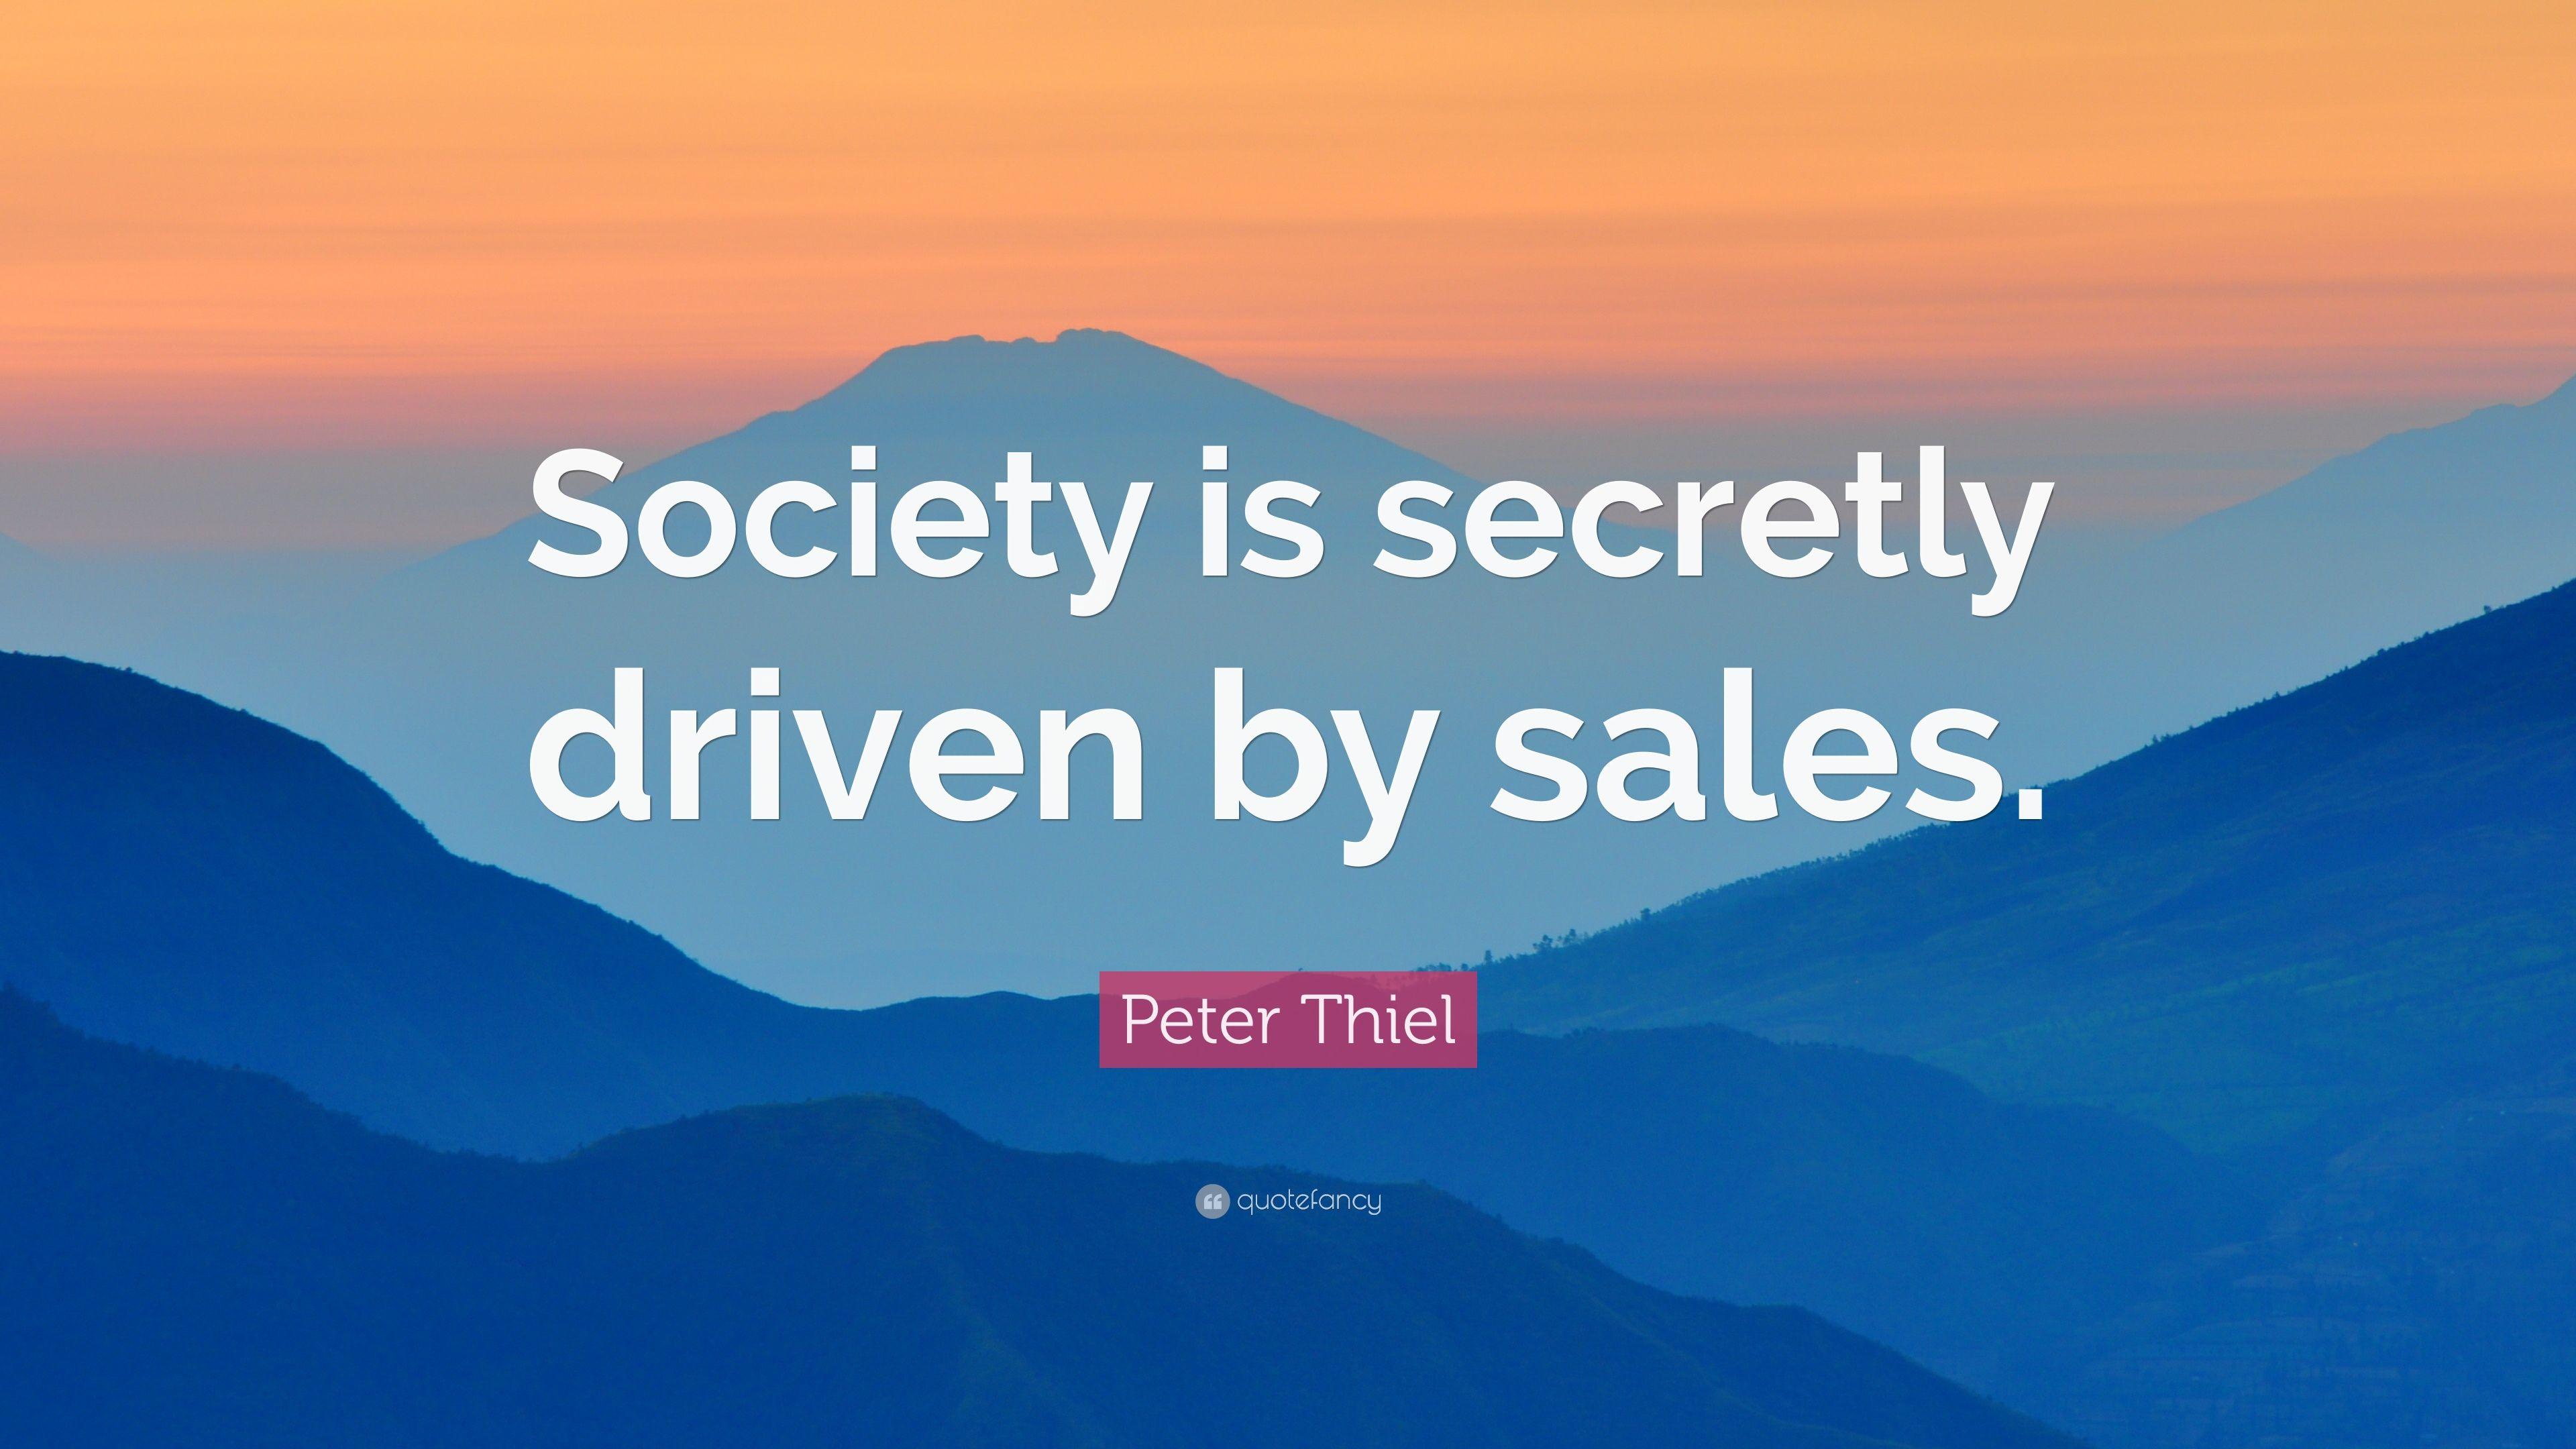 Peter Thiel Quote: “Society is secretly driven by sales.” 8